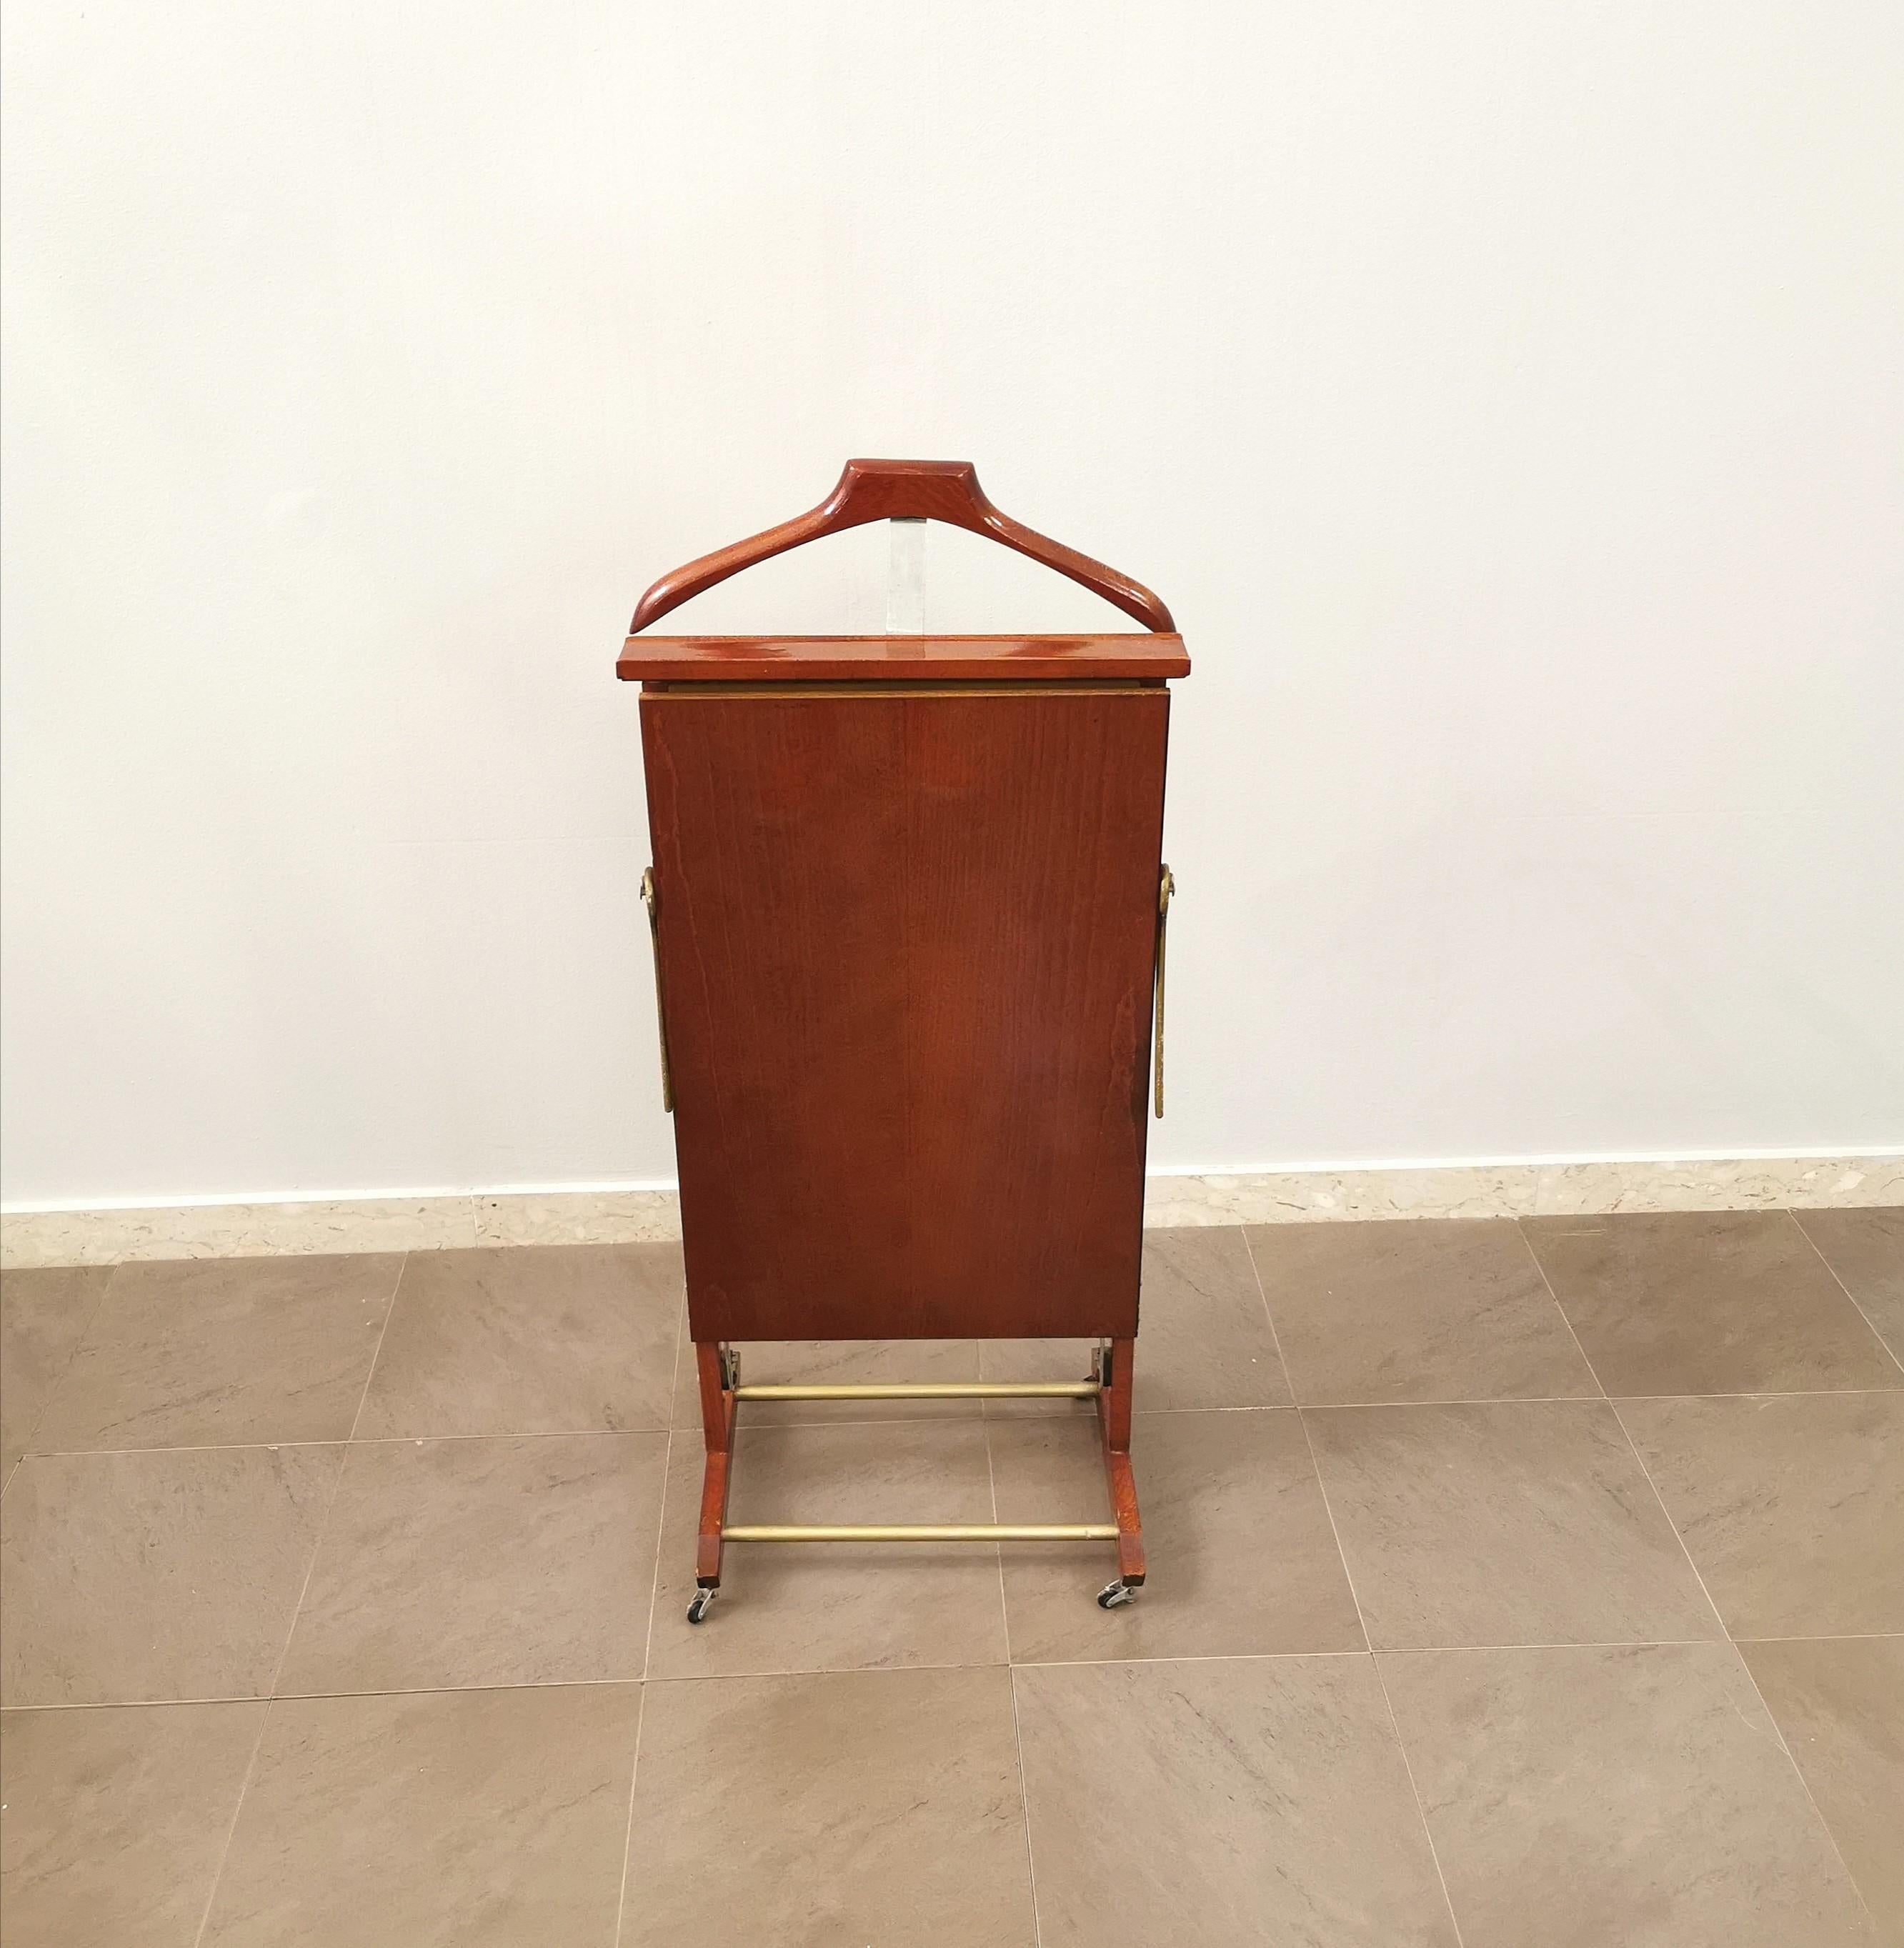 Valet stand / clothes rack produced in Italy by the Reguitti Brothers in the 1950s. The valet stand is in mahogany wood with a particular 